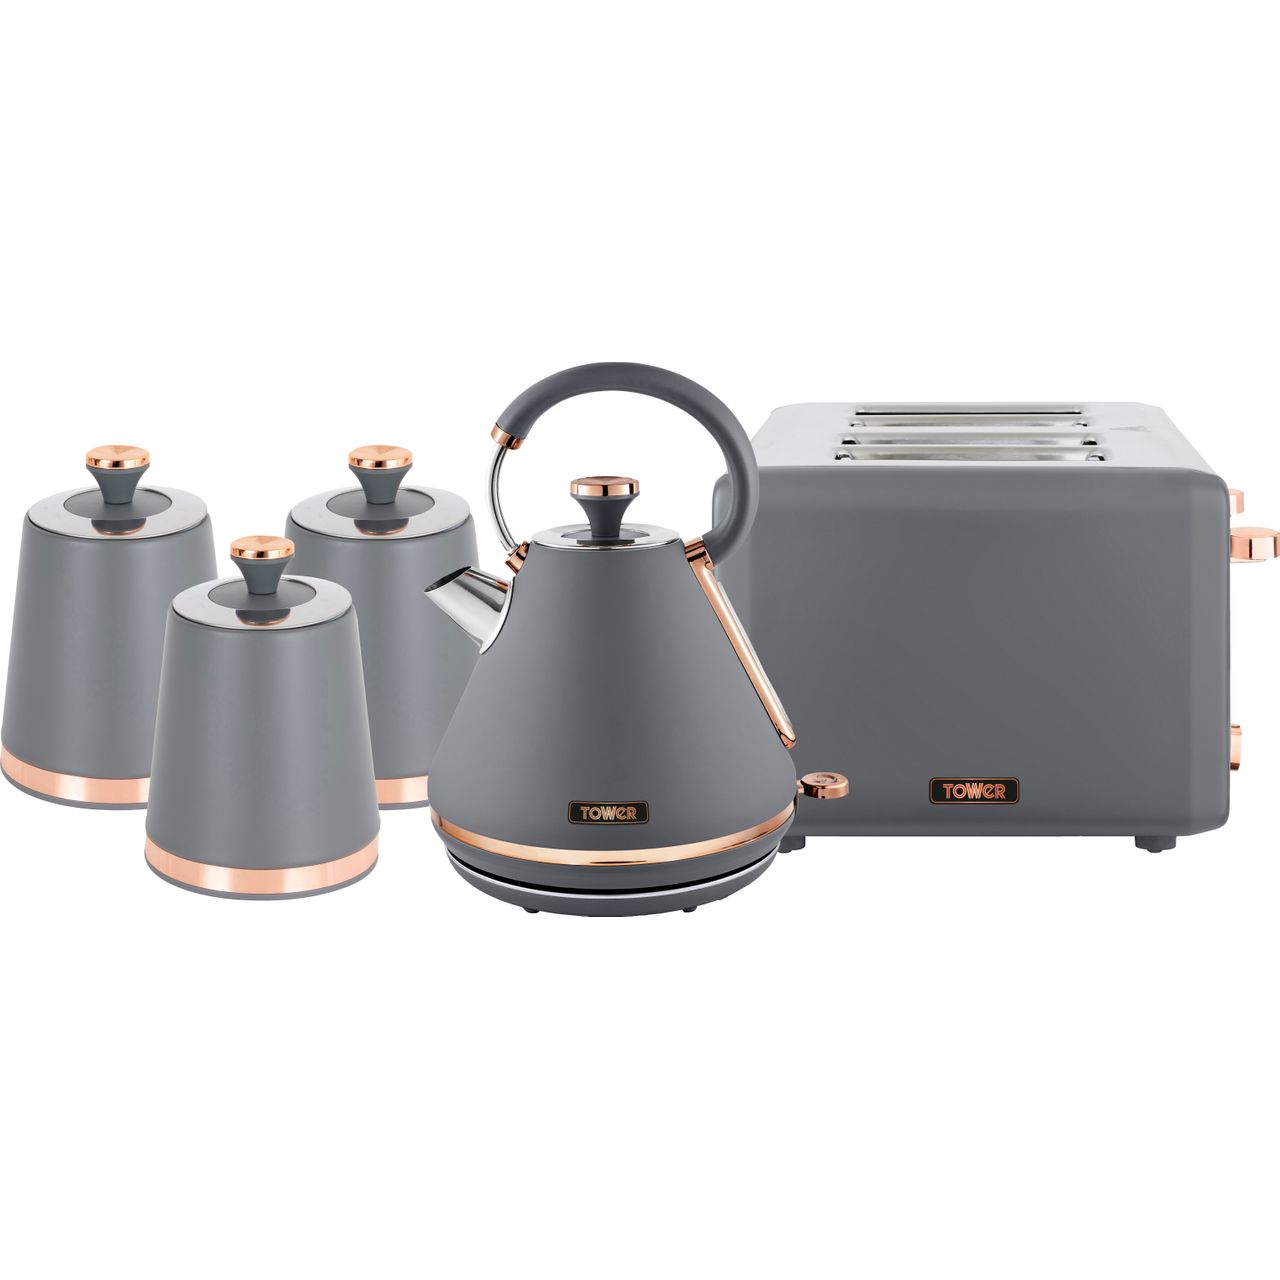 Tower Cavaletto AOBUNDLE021 Kettle And Toaster Sets Review